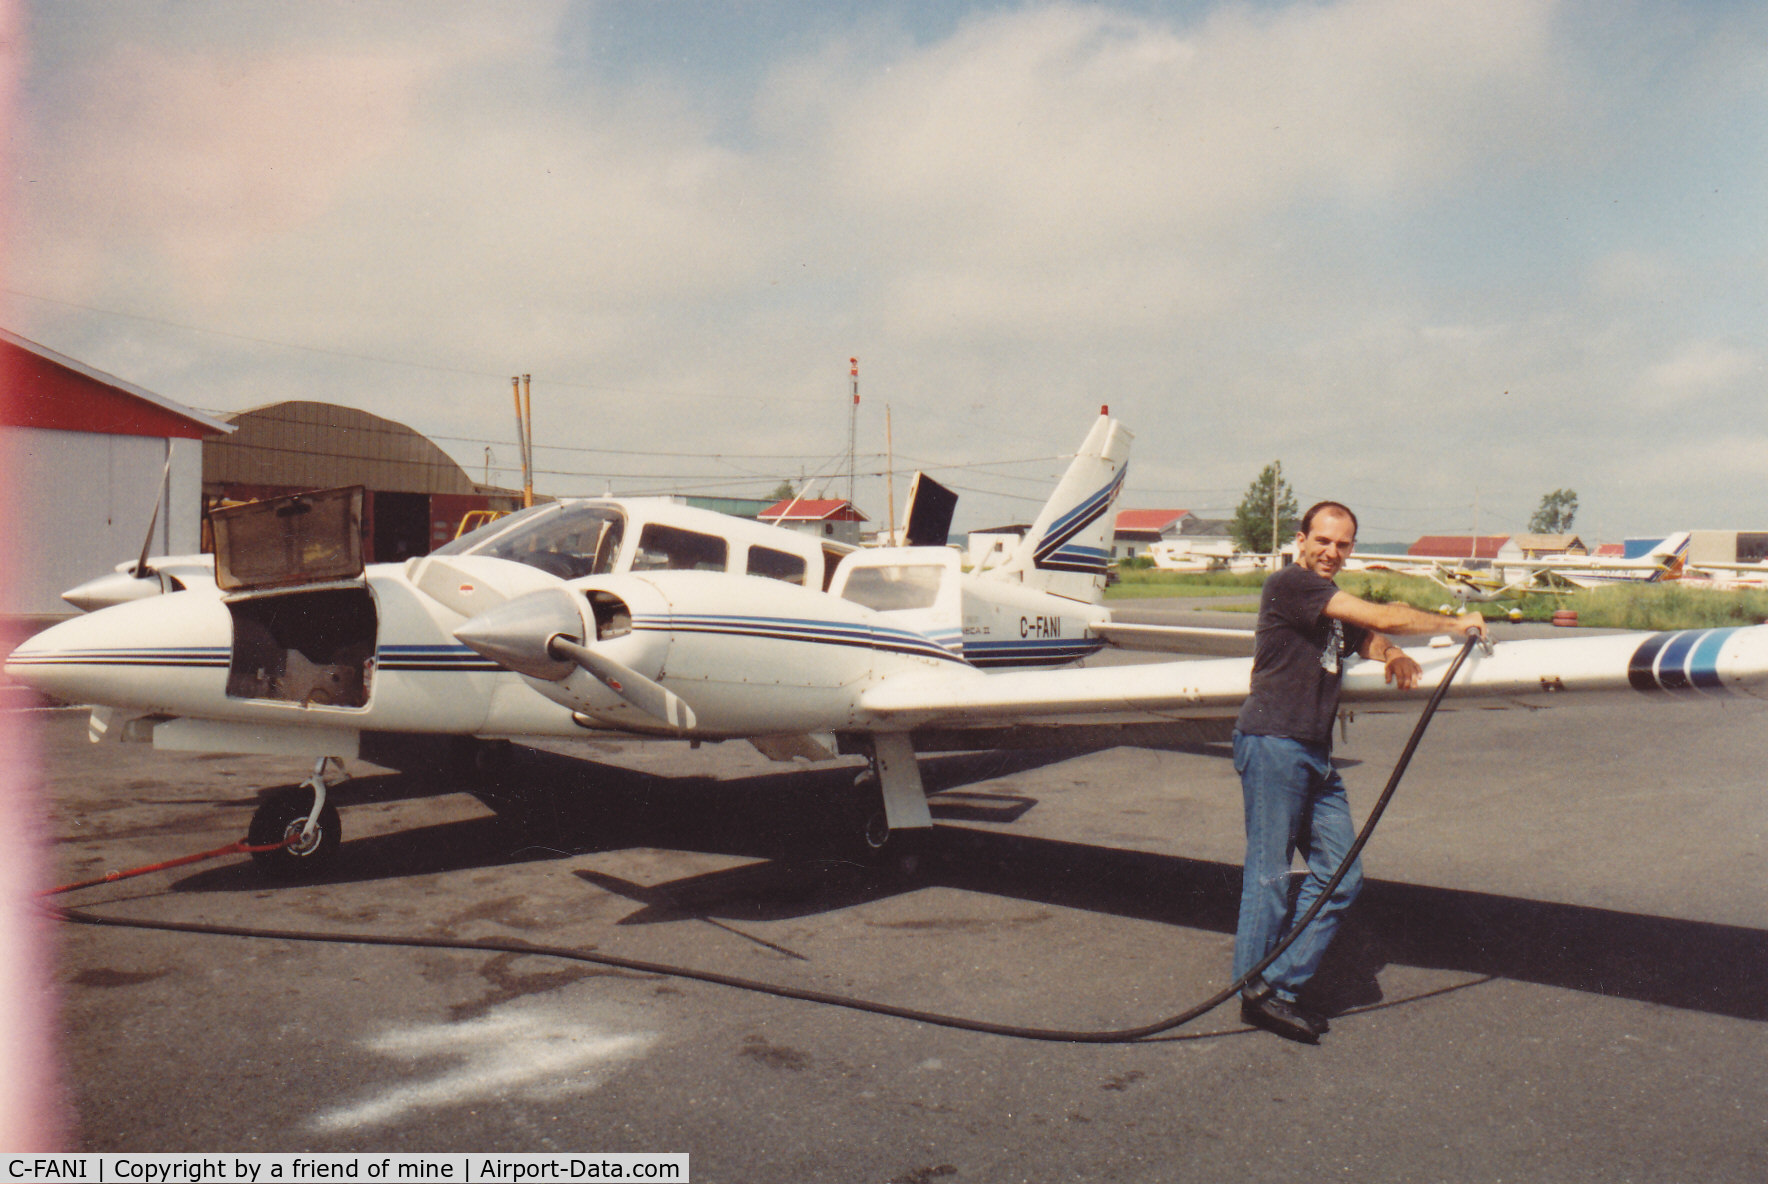 C-FANI, 1975 Piper PA-34-200T C/N 34-7570278, It was my IFR training aircraft in Beloeil, Quebec in 1991-92